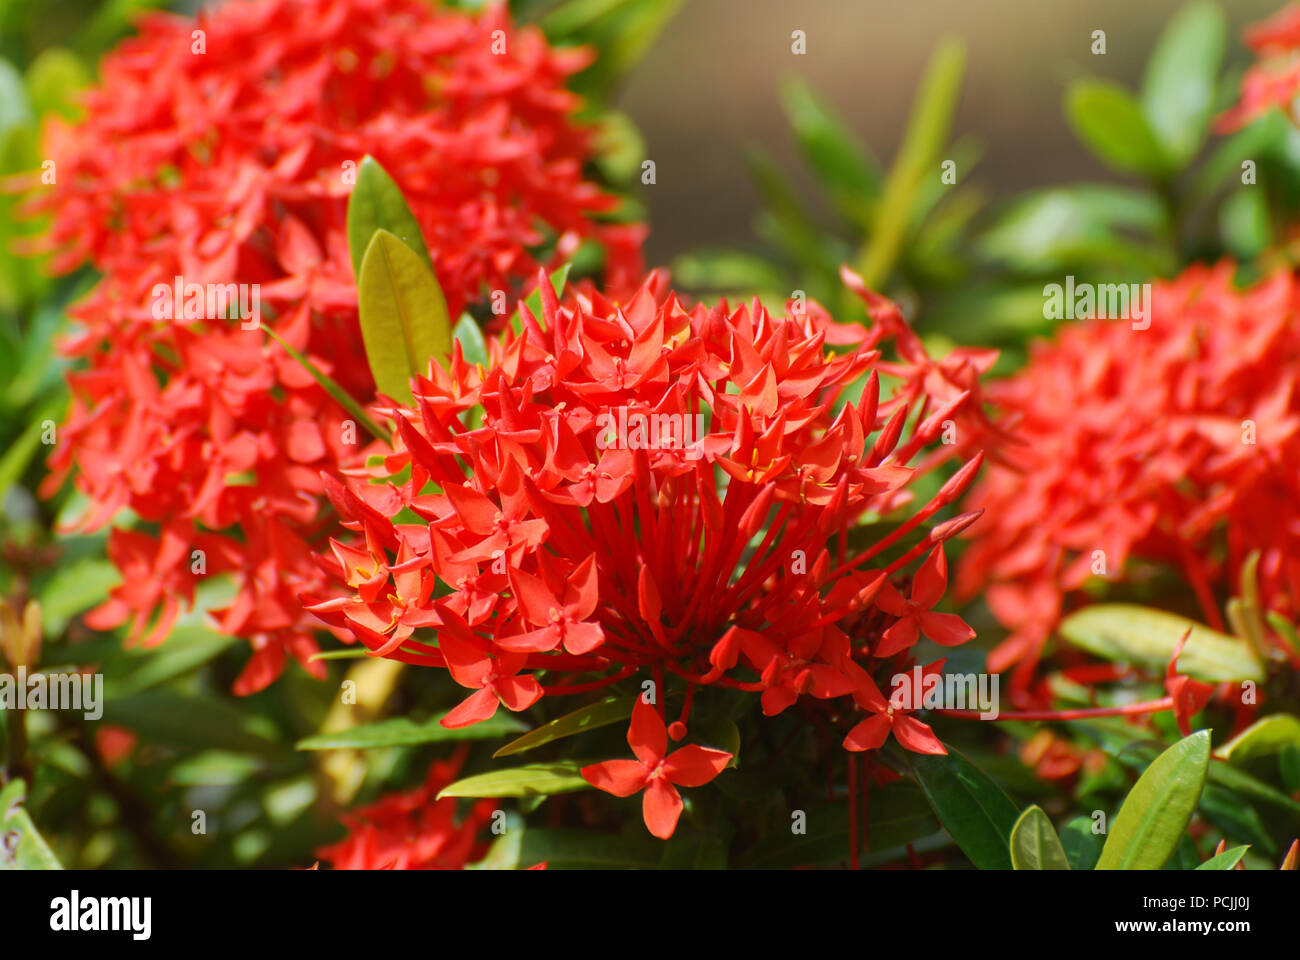 Blooming Red Cleome Flower Blossom In A Garden Stock Photo Alamy